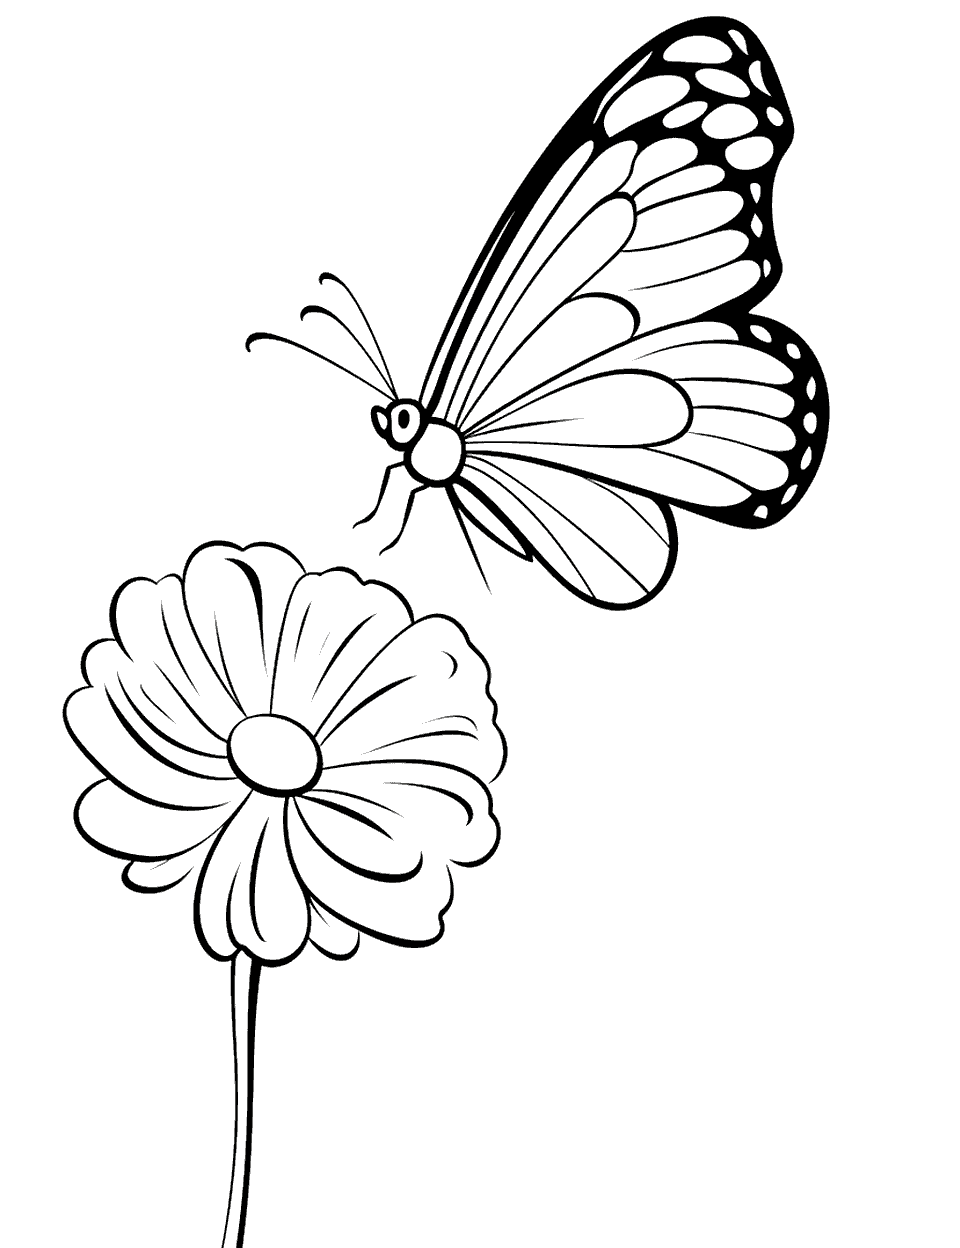 Butterfly Flying Coloring Page - A butterfly flying gently over a single flower.